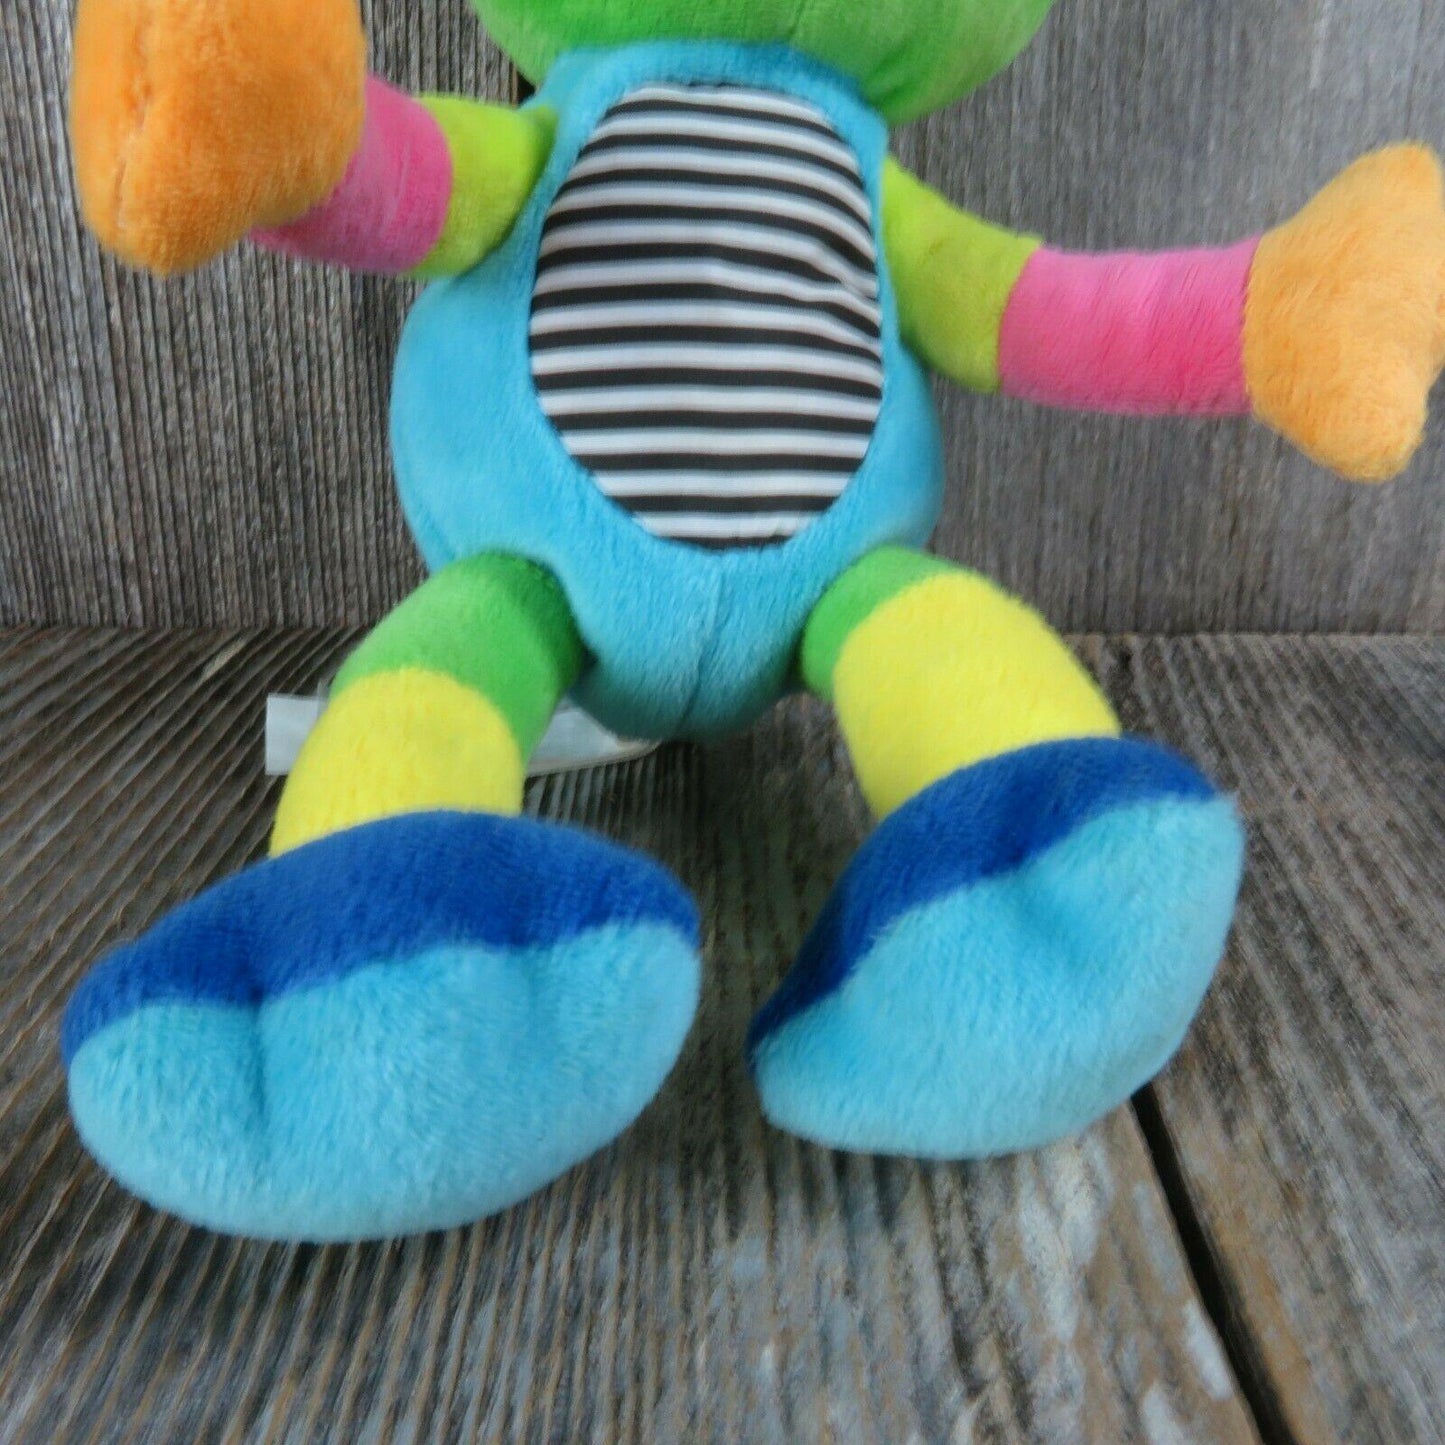 Frog Plush Crinkle Rattle Bendable Carters Green Blue 2013 Baby Toy Stuffed